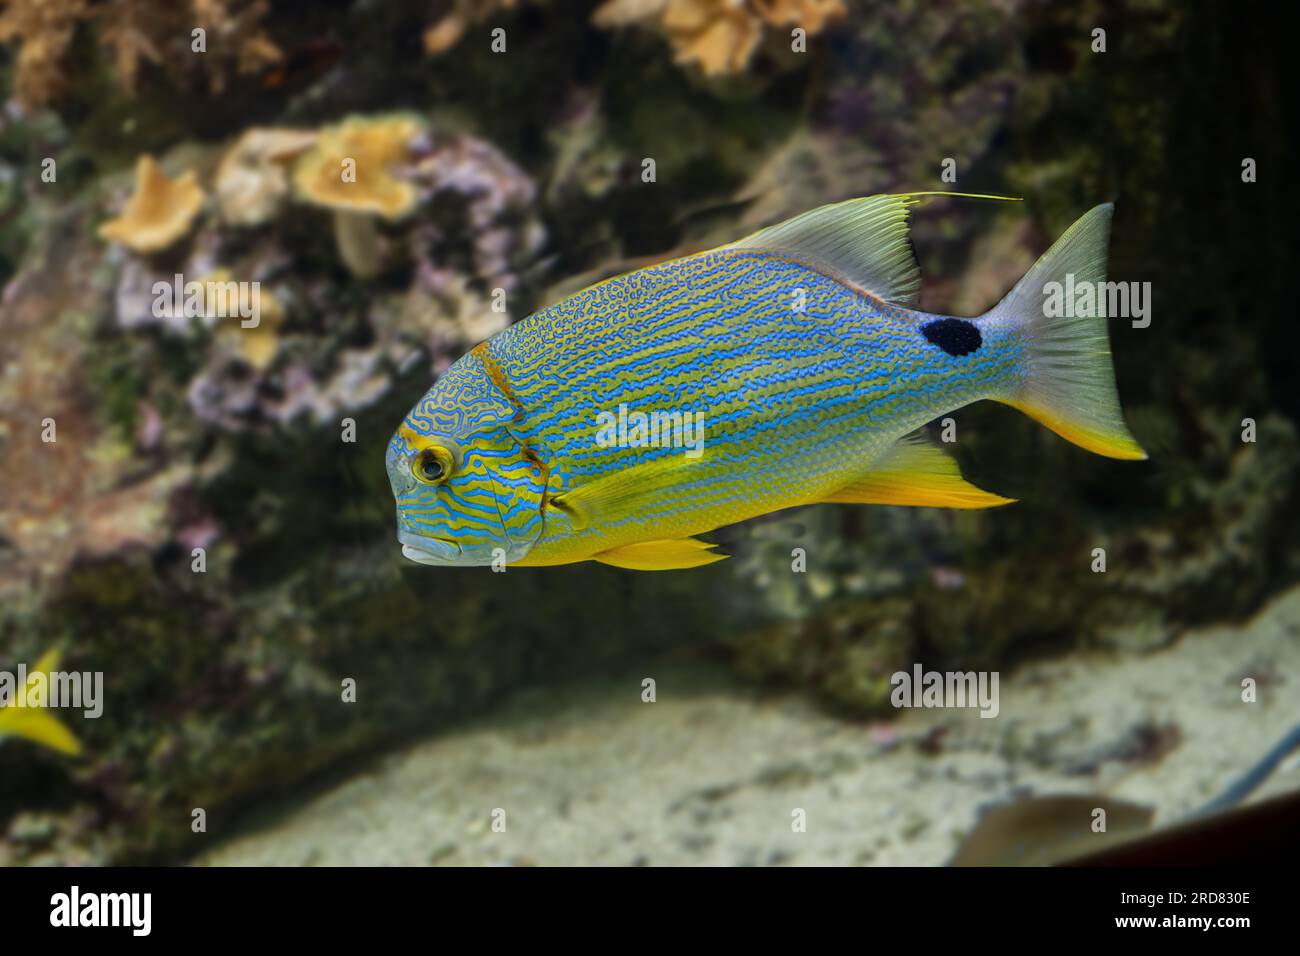 Sailfin snapper blue-lined sea bream (Symphorichthys spilurus) fish underwater in sea with corals in background Stock Photo